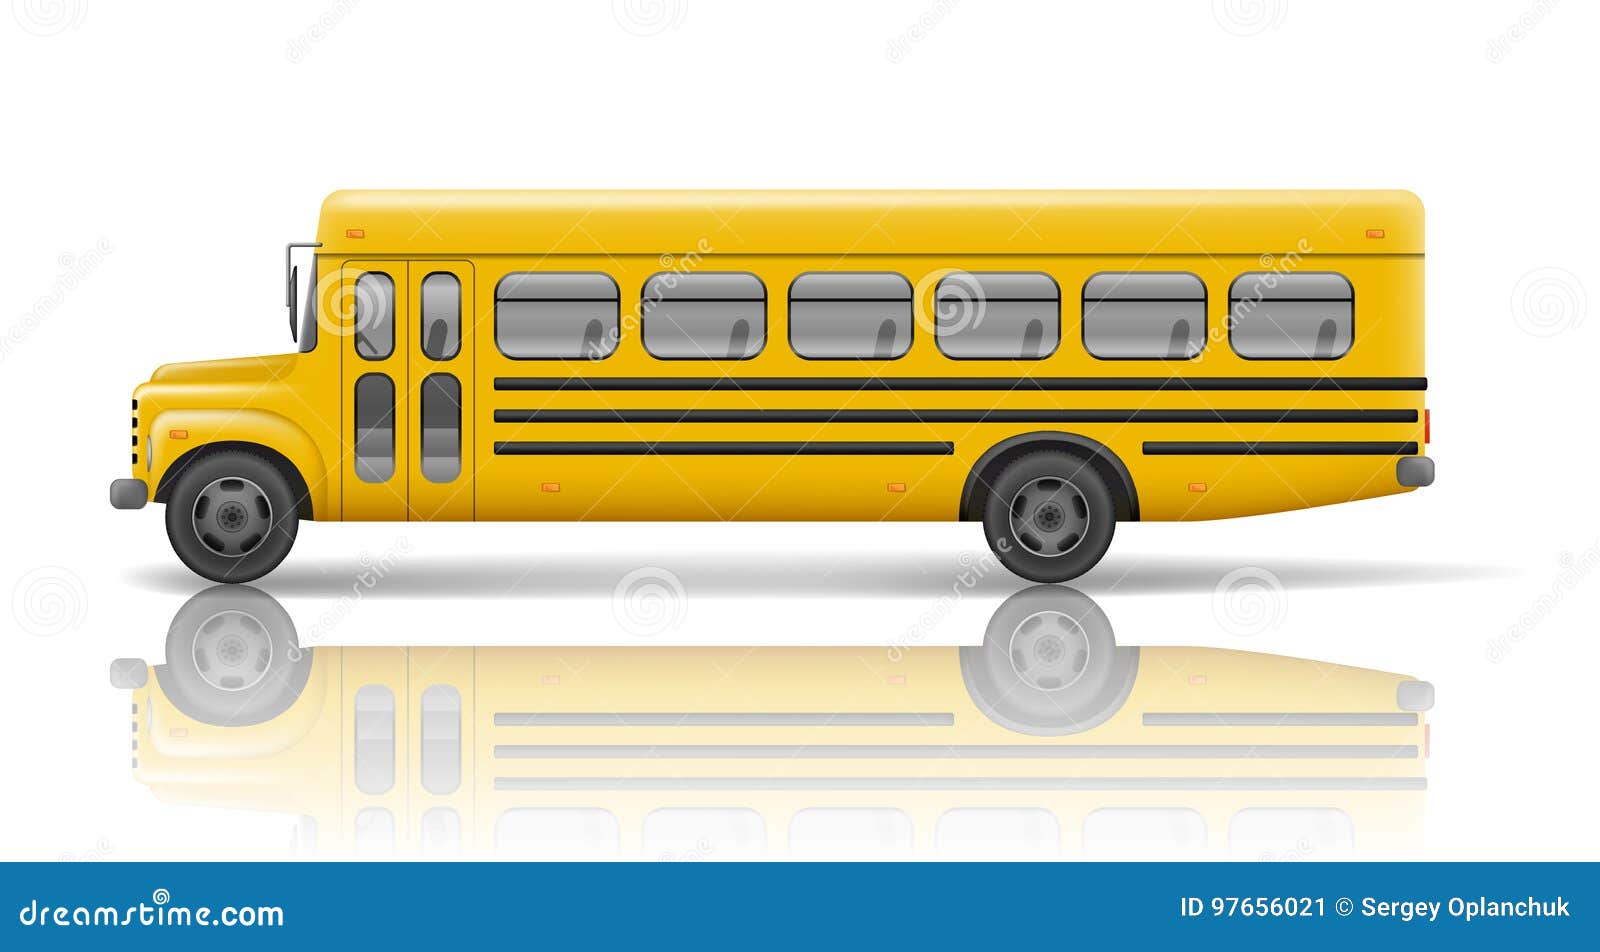 Download Yellow School Bus Transportation And Vehicle Transport Travel Automobile Relistic School Bus Mockup Vector Stock Vector Illustration Of Speed Education 97656021 PSD Mockup Templates